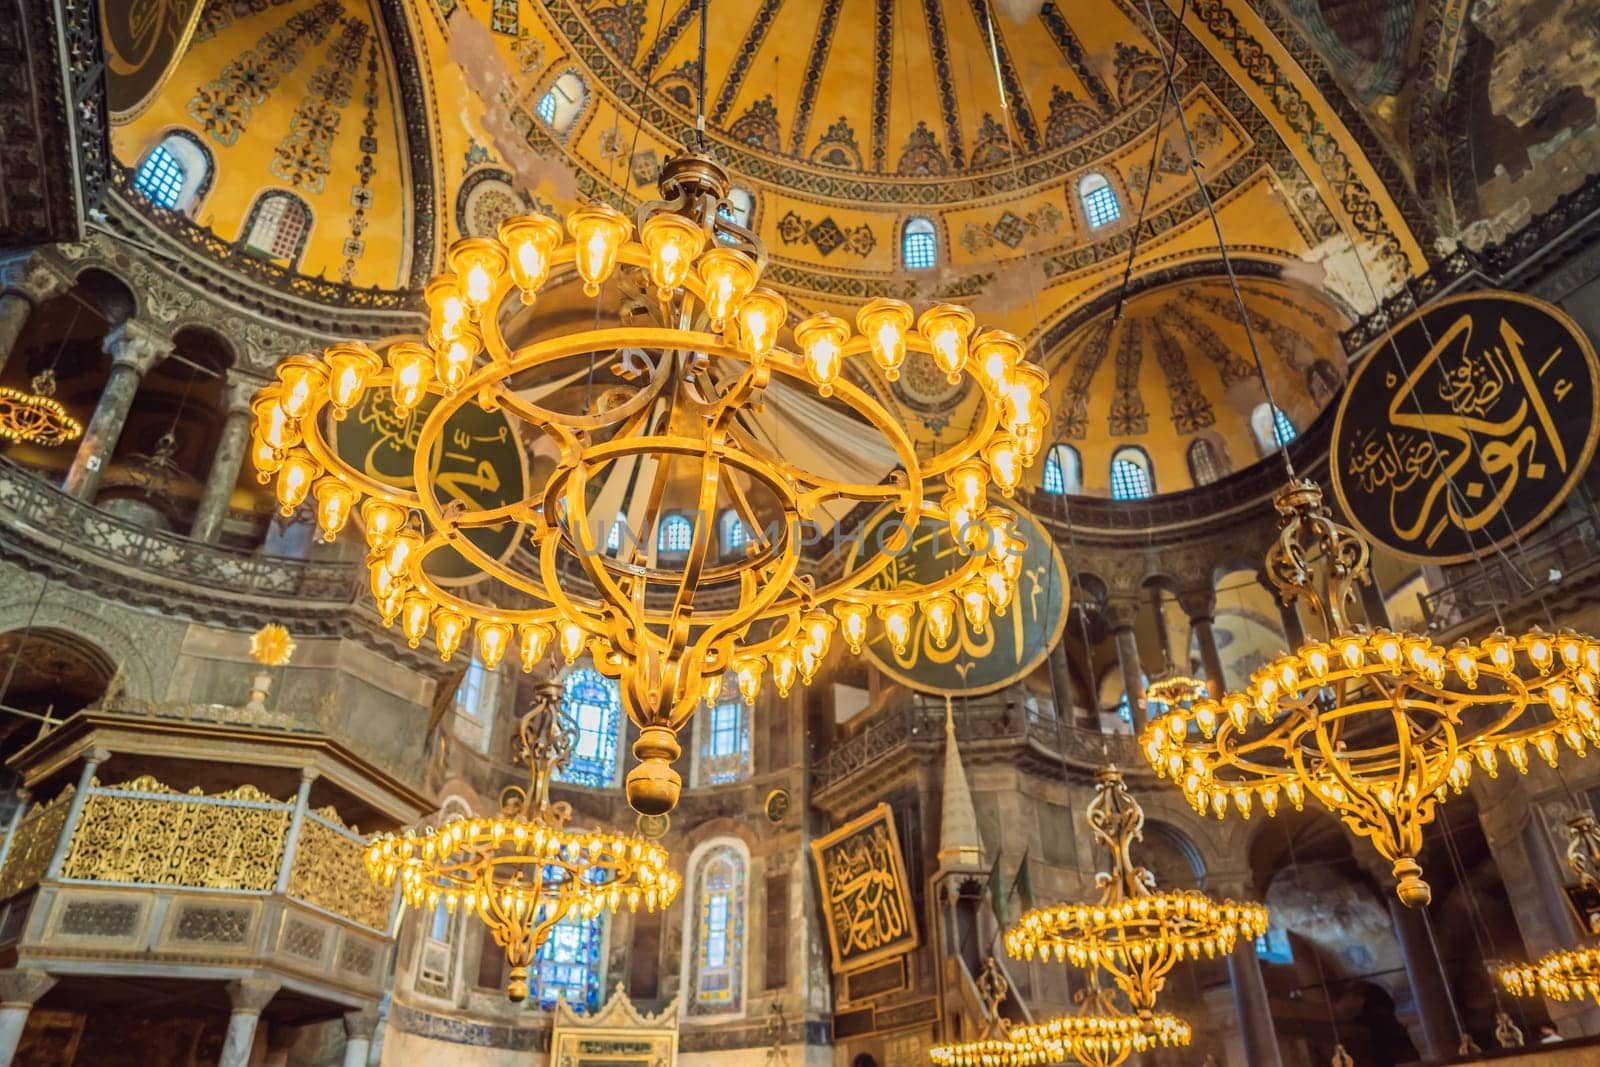 INSCRIPTION - large round medallions with inscriptions denoting the names of Allah, the Prophet Muhammad, as well as the first 4 caliphs. Hagia Sophia Hagia Sofia, Ayasofya interior in Istanbul, Turkey, Byzantine architecture, city landmark and architectural world wonder. Turkiye.